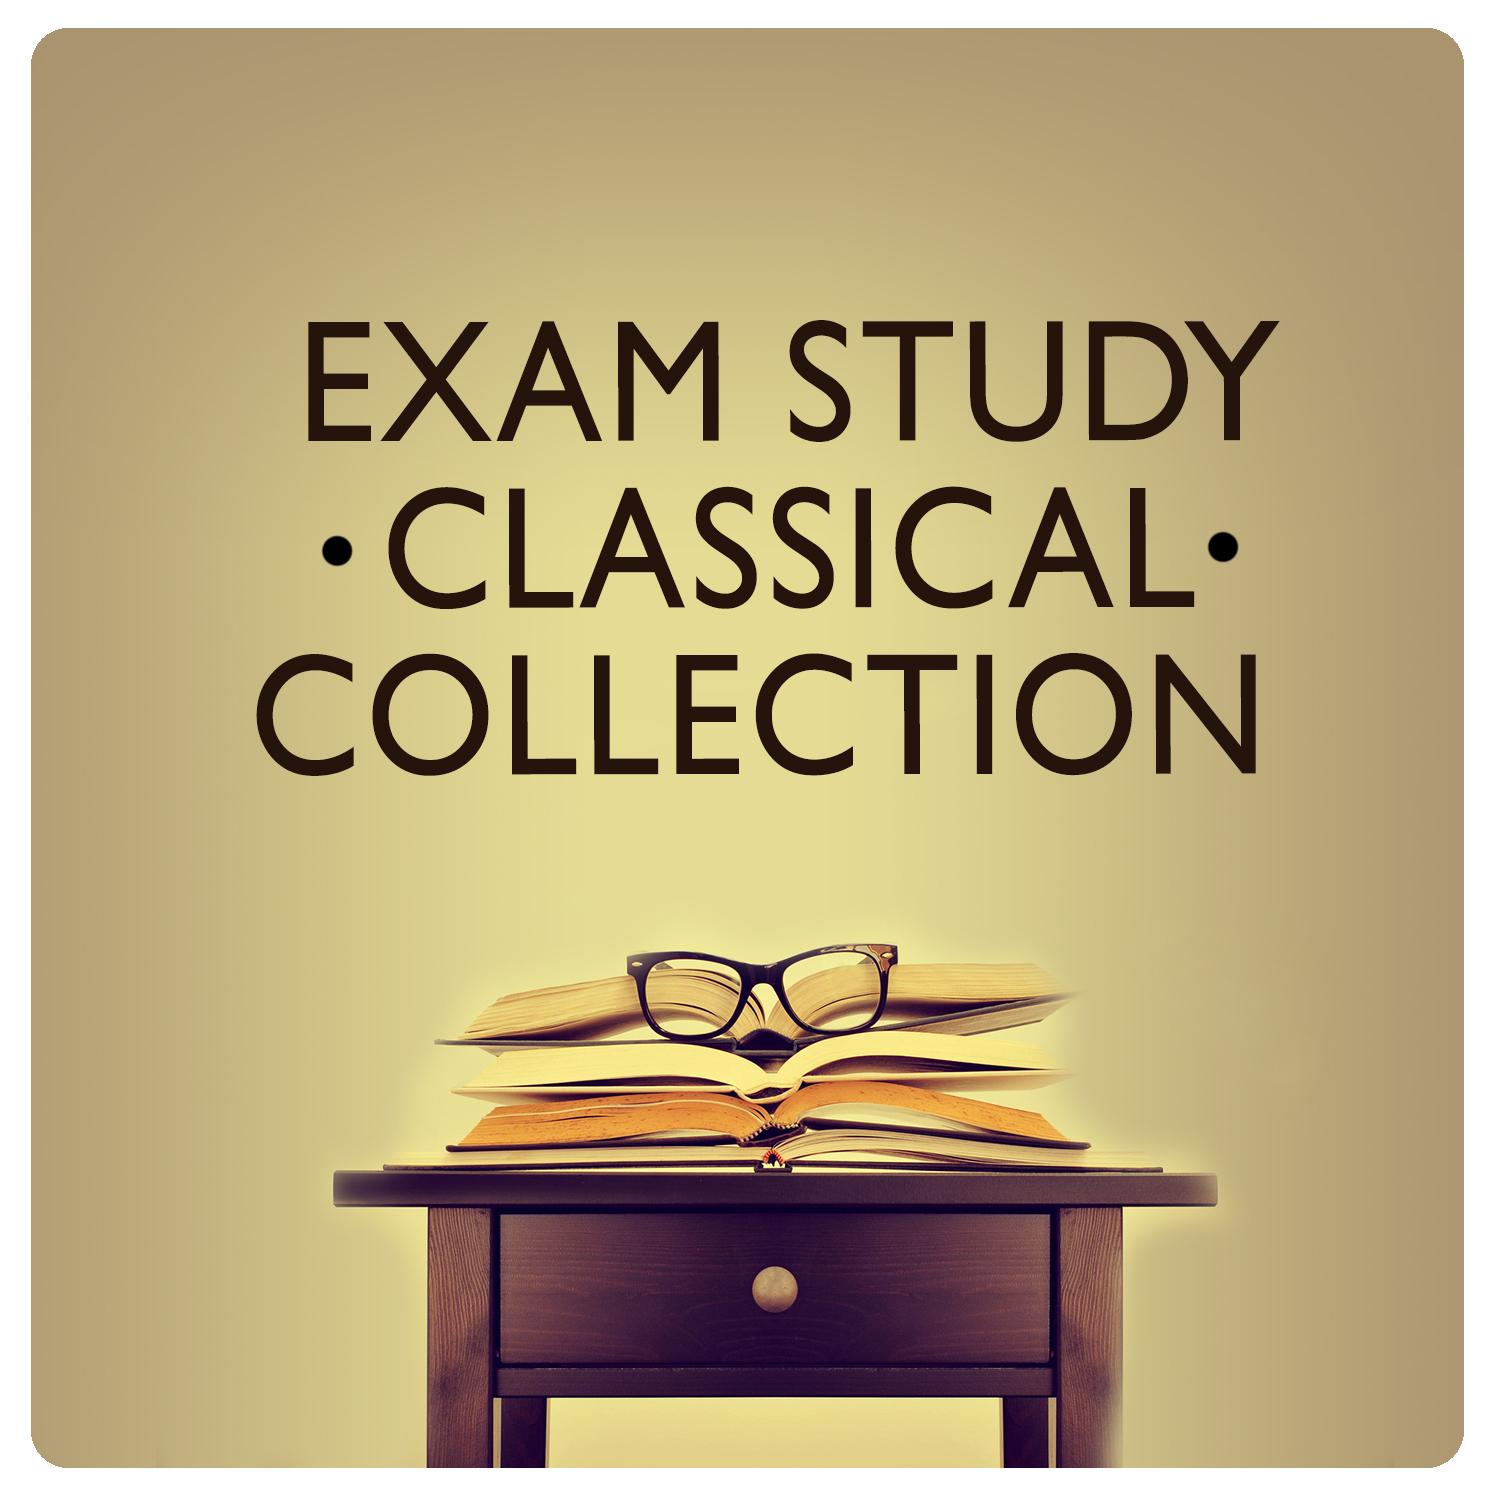 Exam Study Classical Collection